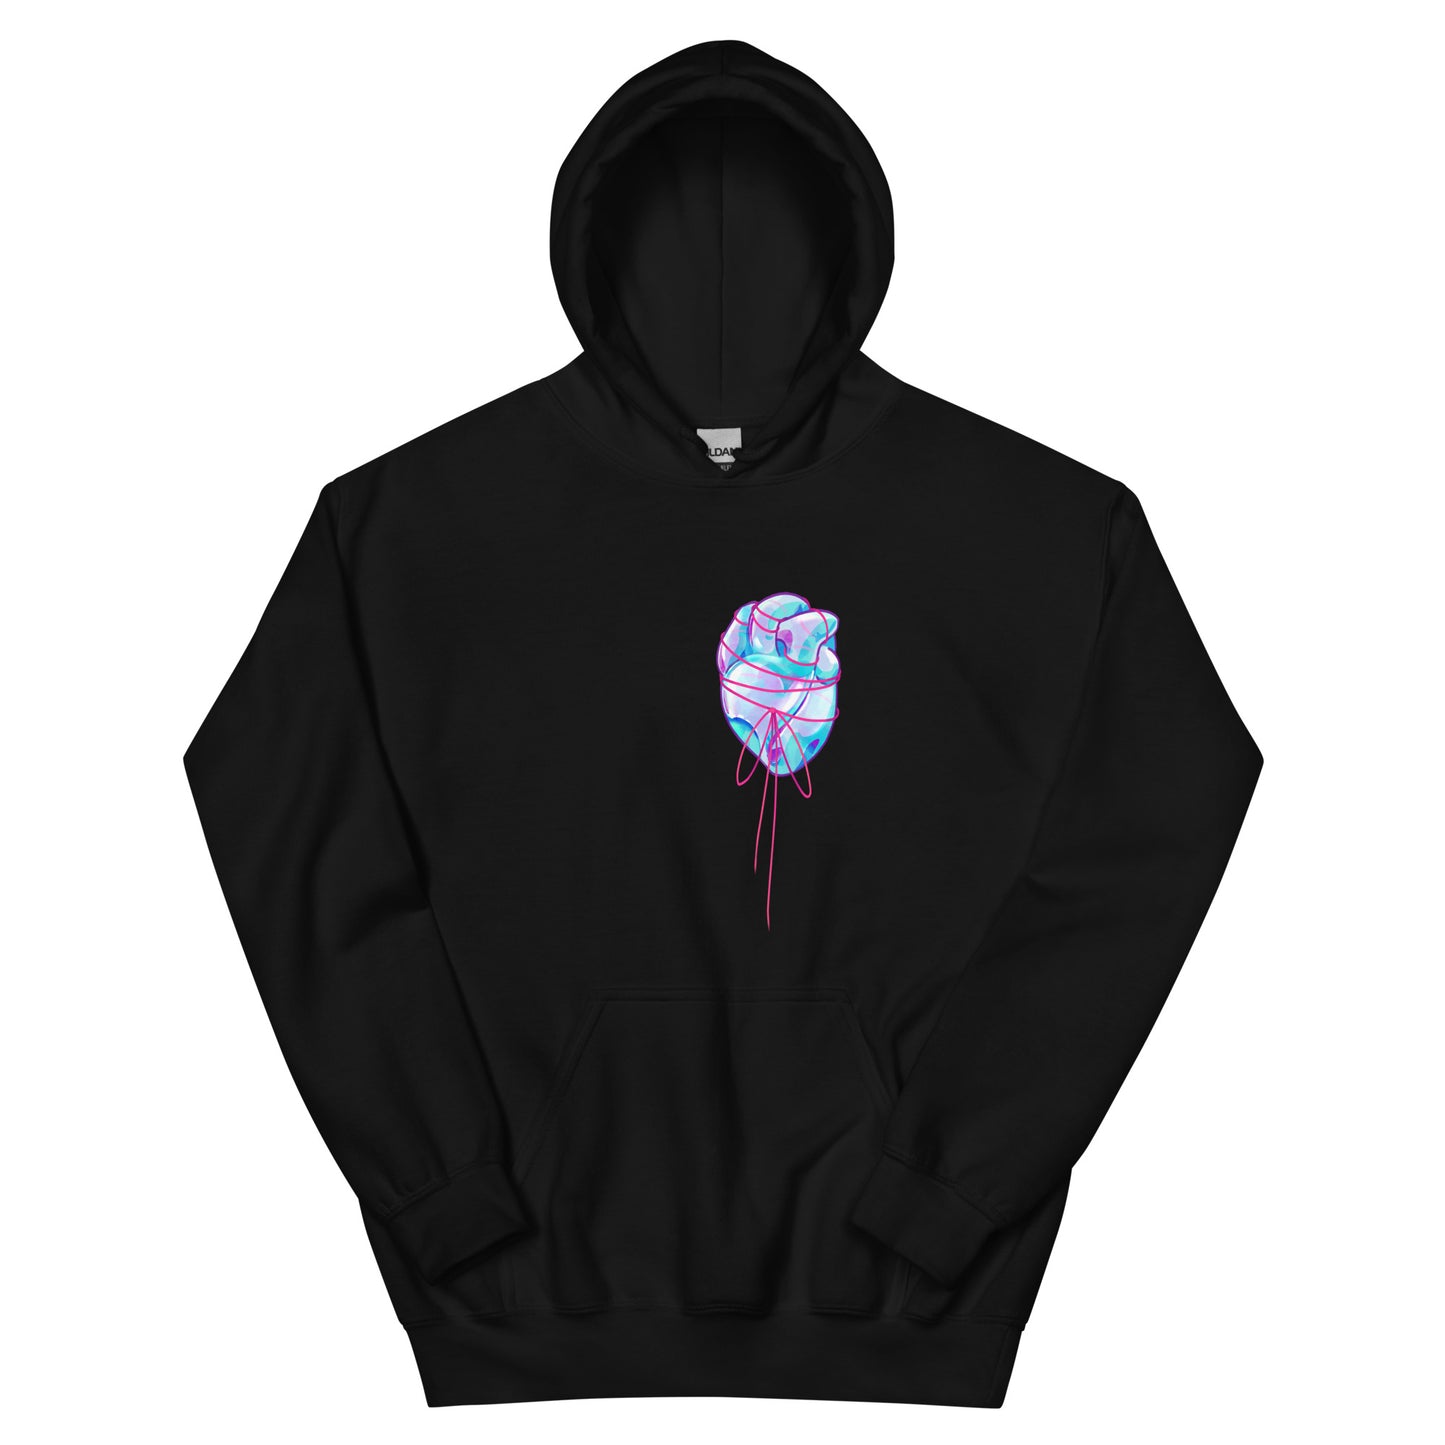 Glass Heart Pullover Hoodie